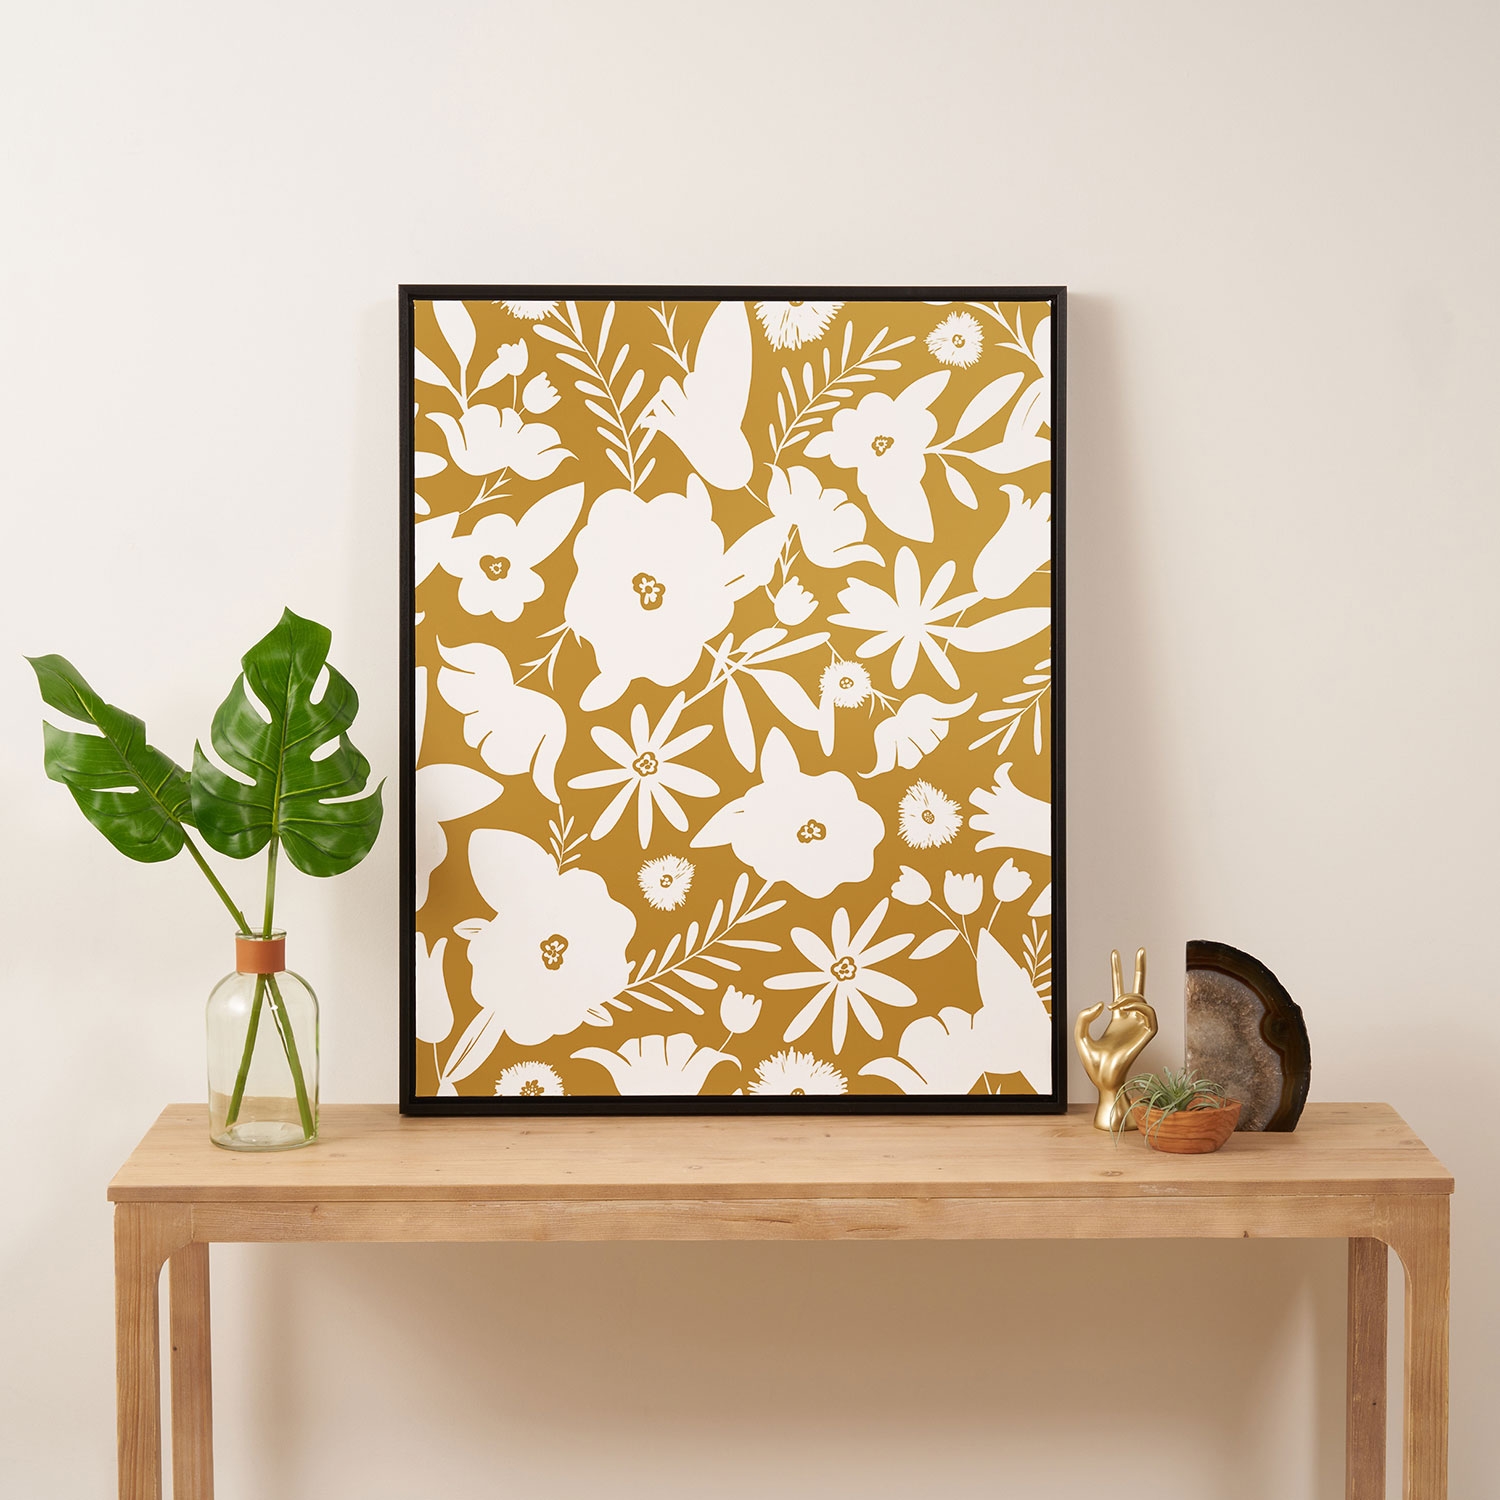 Finley Floral Goldenrod by Heather Dutton - Art Canvas 24" x 30" - Image 3